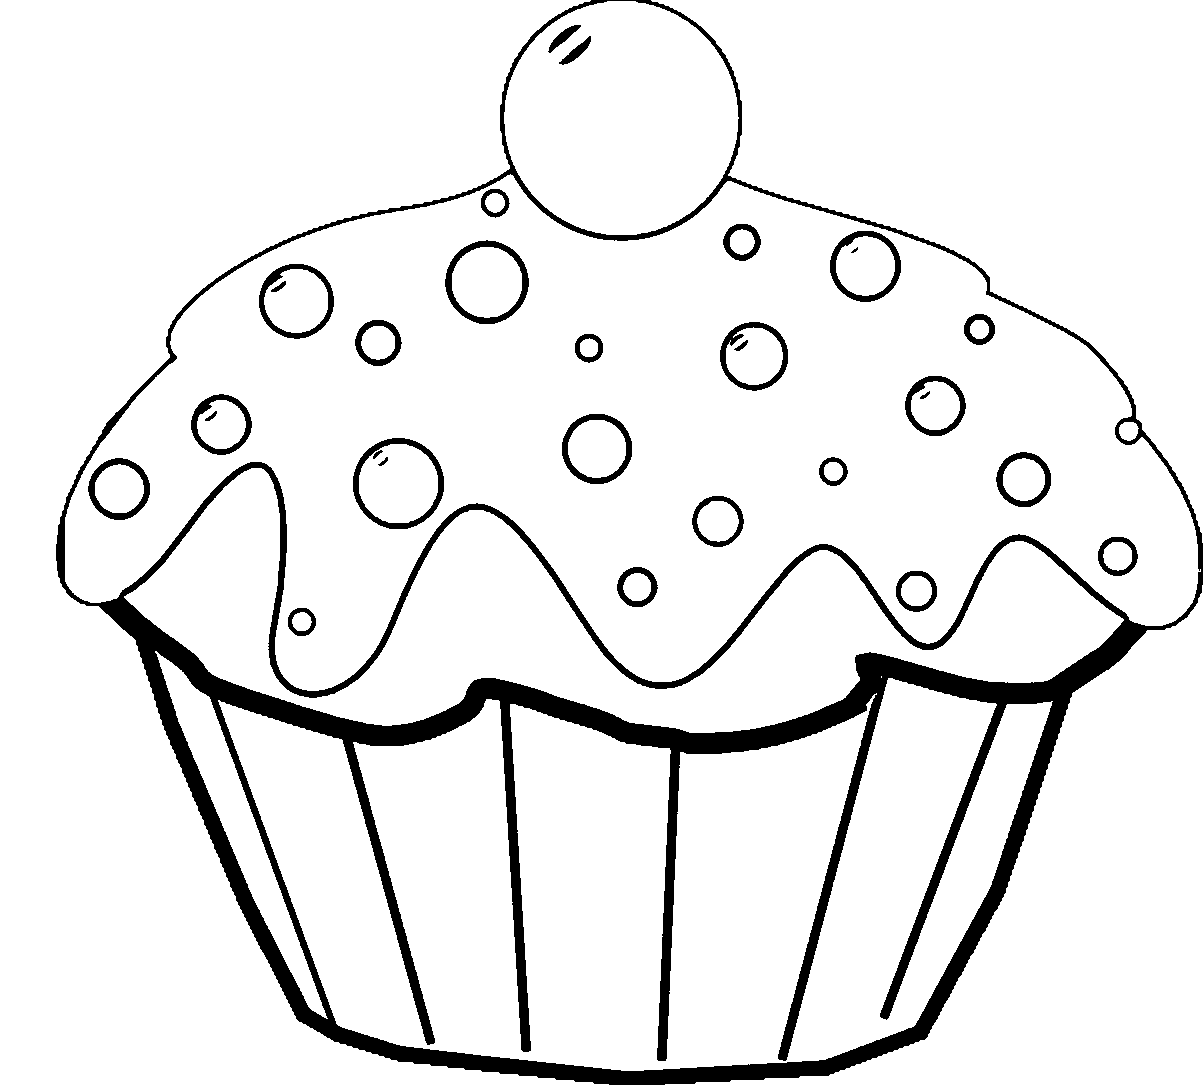 Cupcake Cup Cake Coloring Page 14 | Wecoloringpage